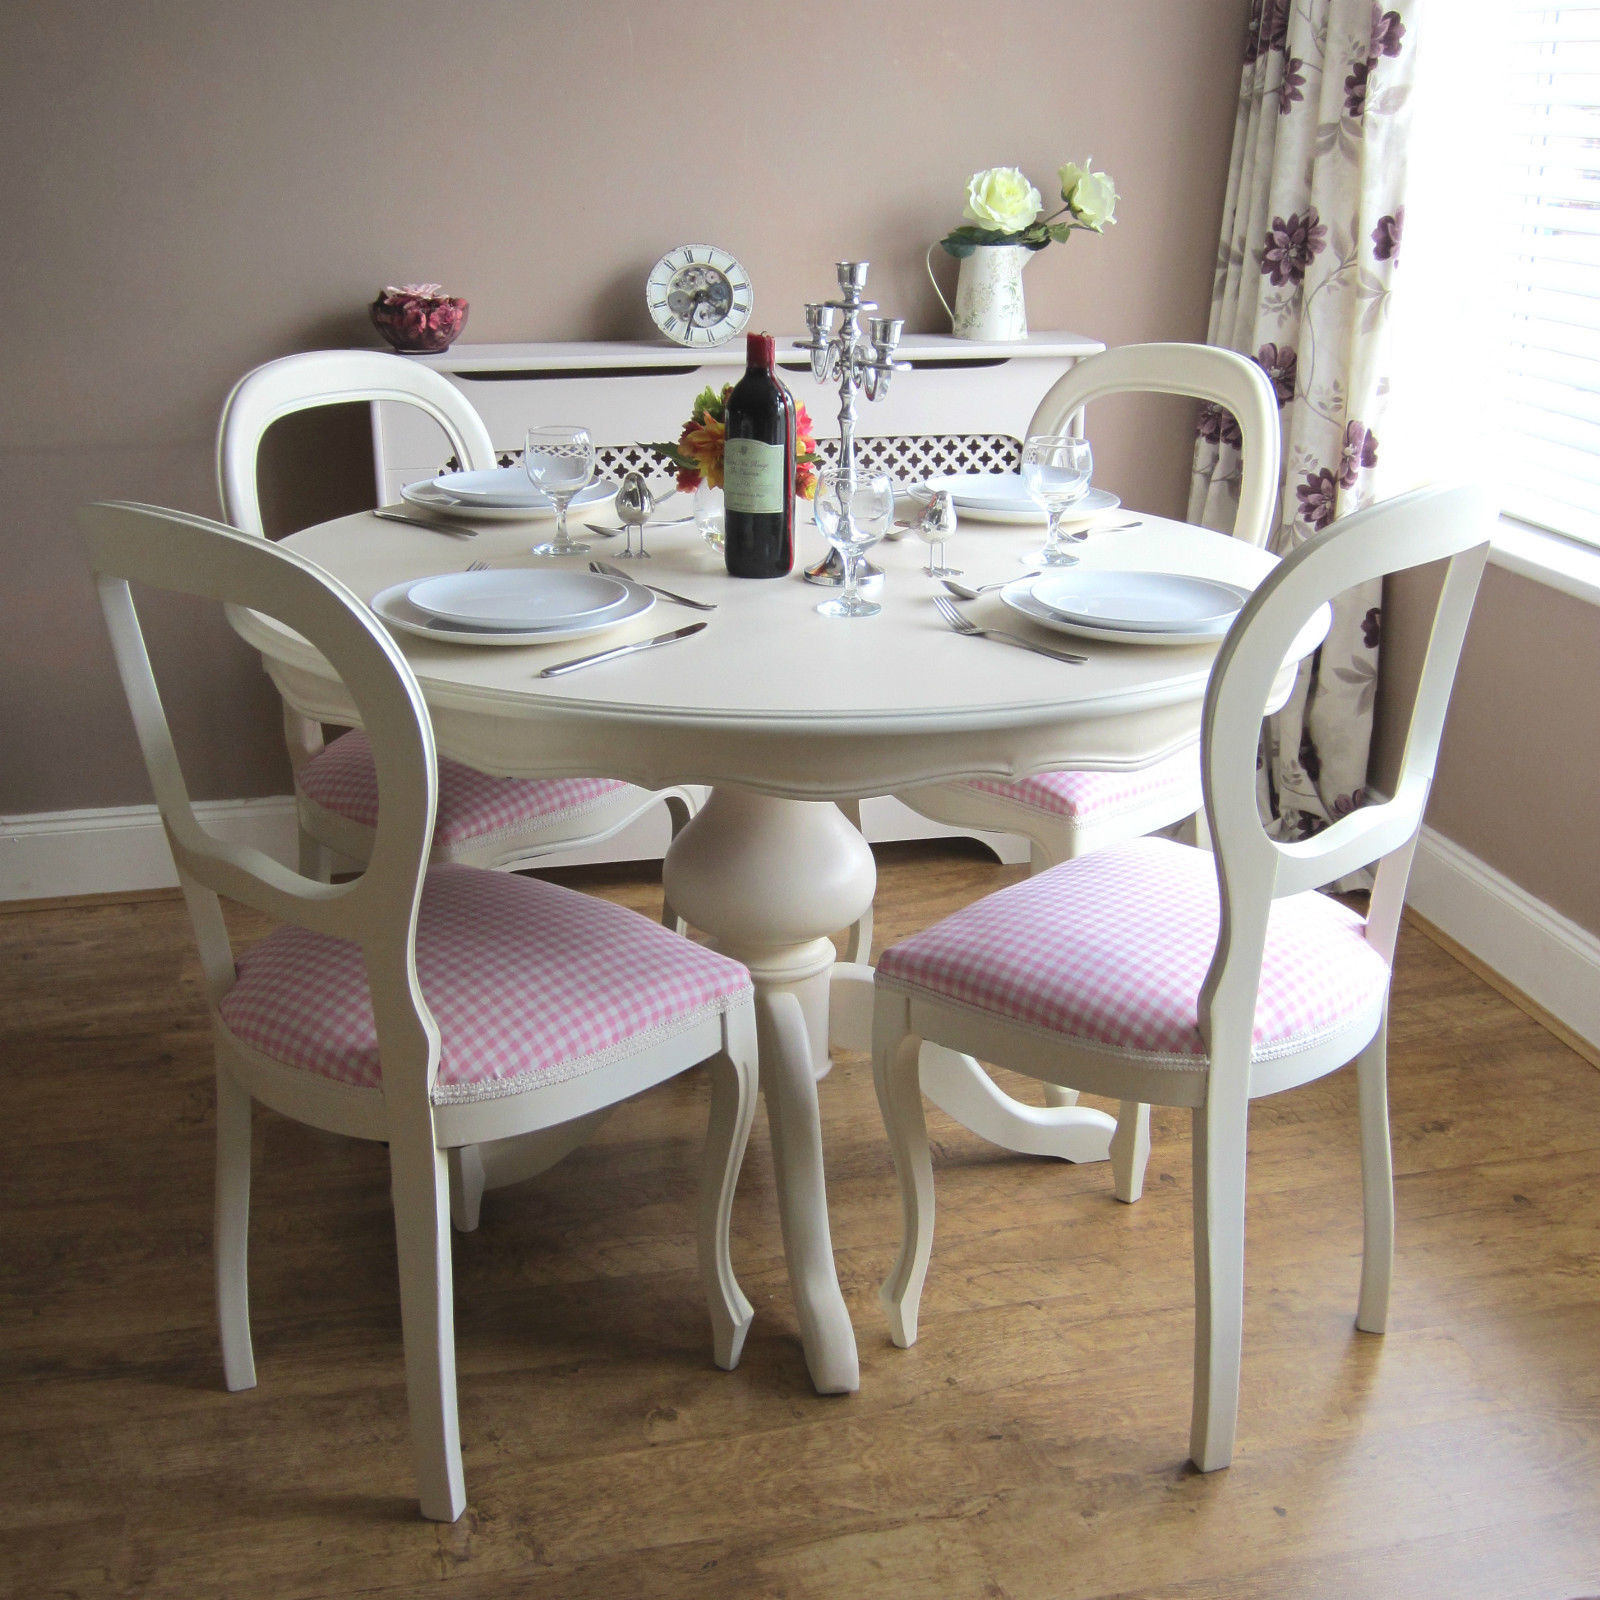 Small Round Kitchen Table Sets
 Beautiful White Round Kitchen Table and Chairs